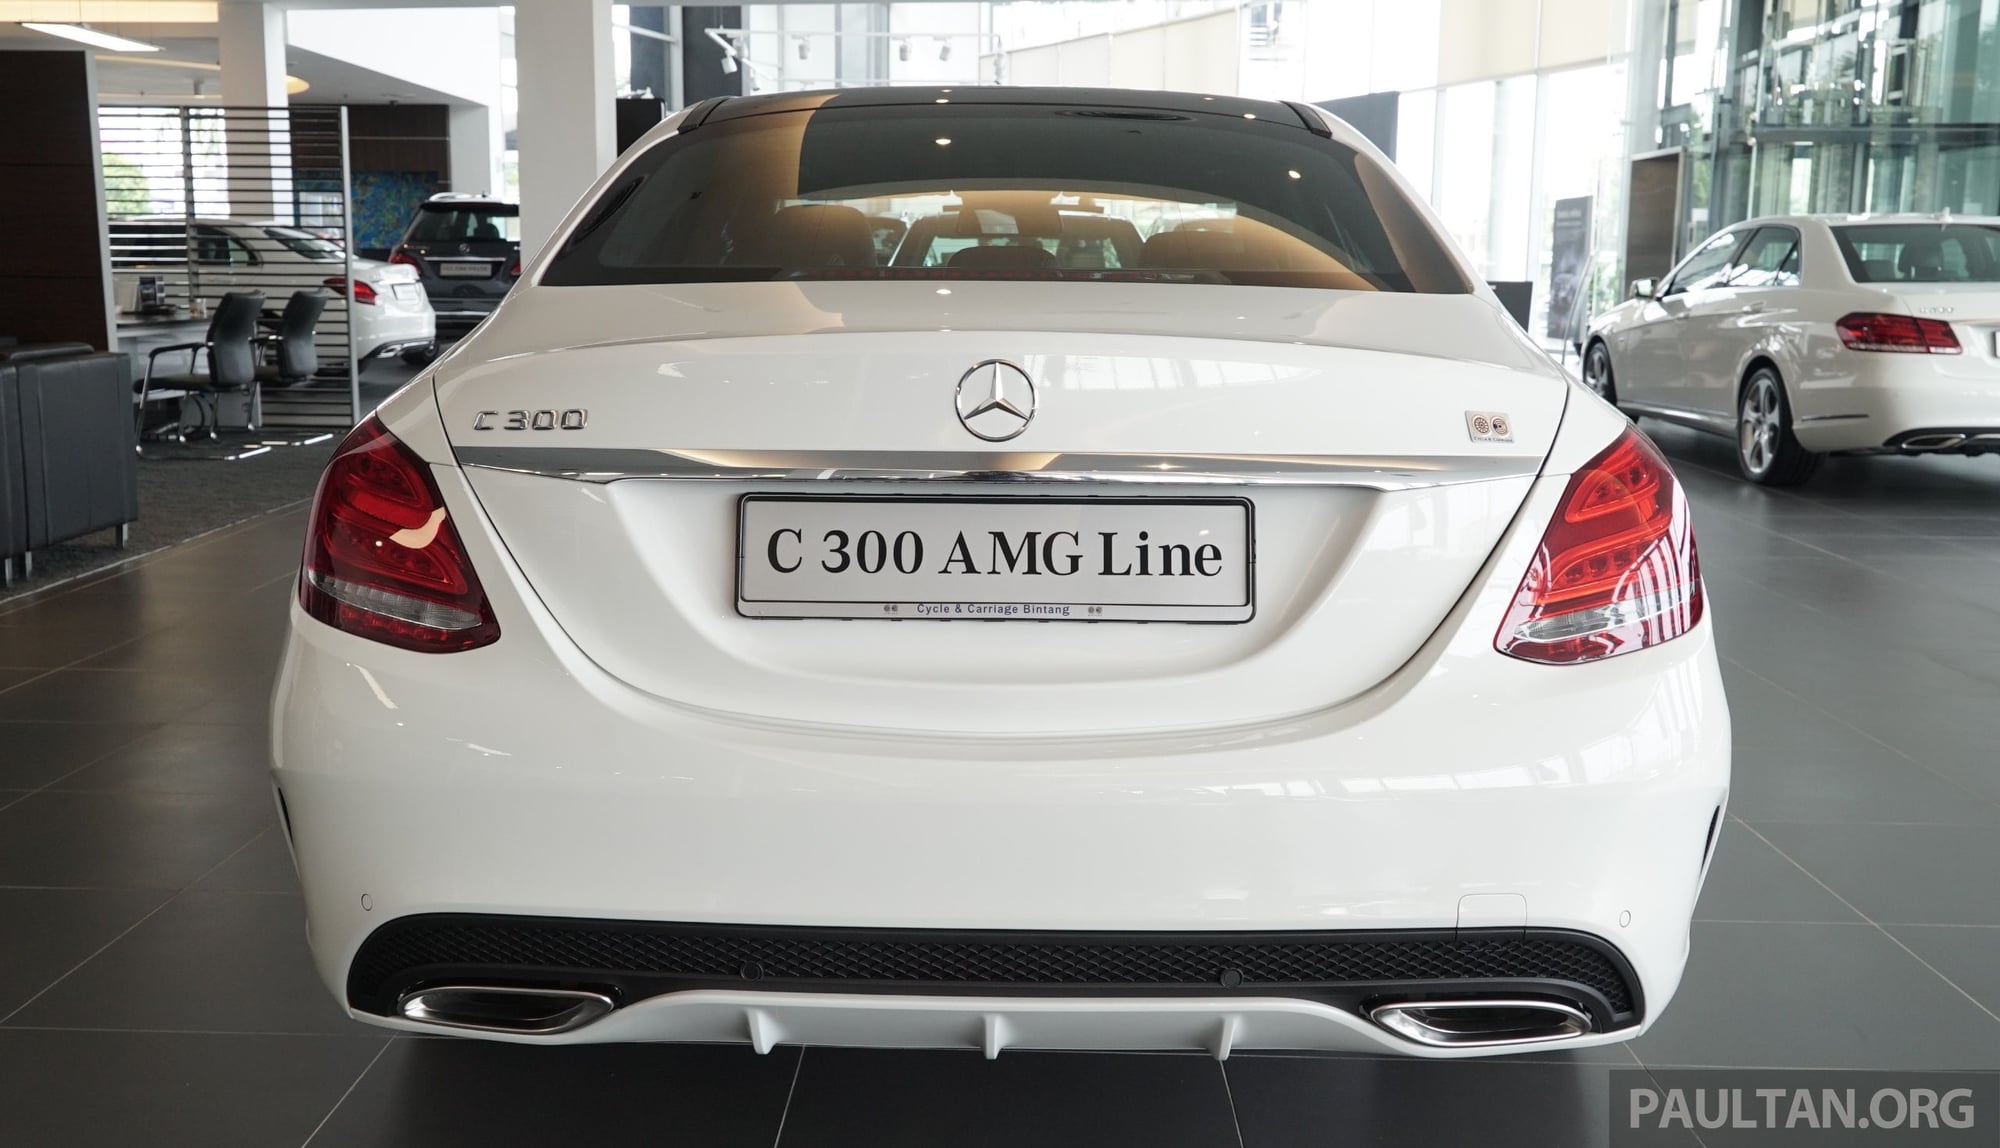 Putting Amg Badge on Benz C400 - Page 2 -  Forums